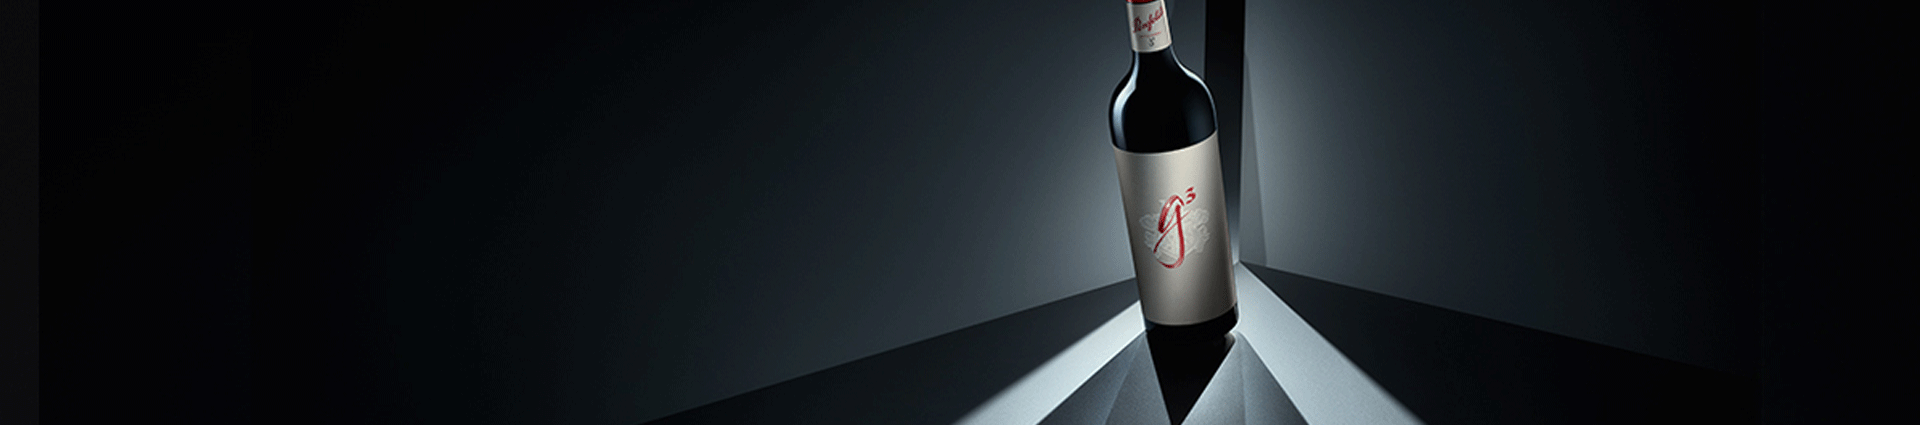 Penfolds g3 bottle on angle with strong blue shadows